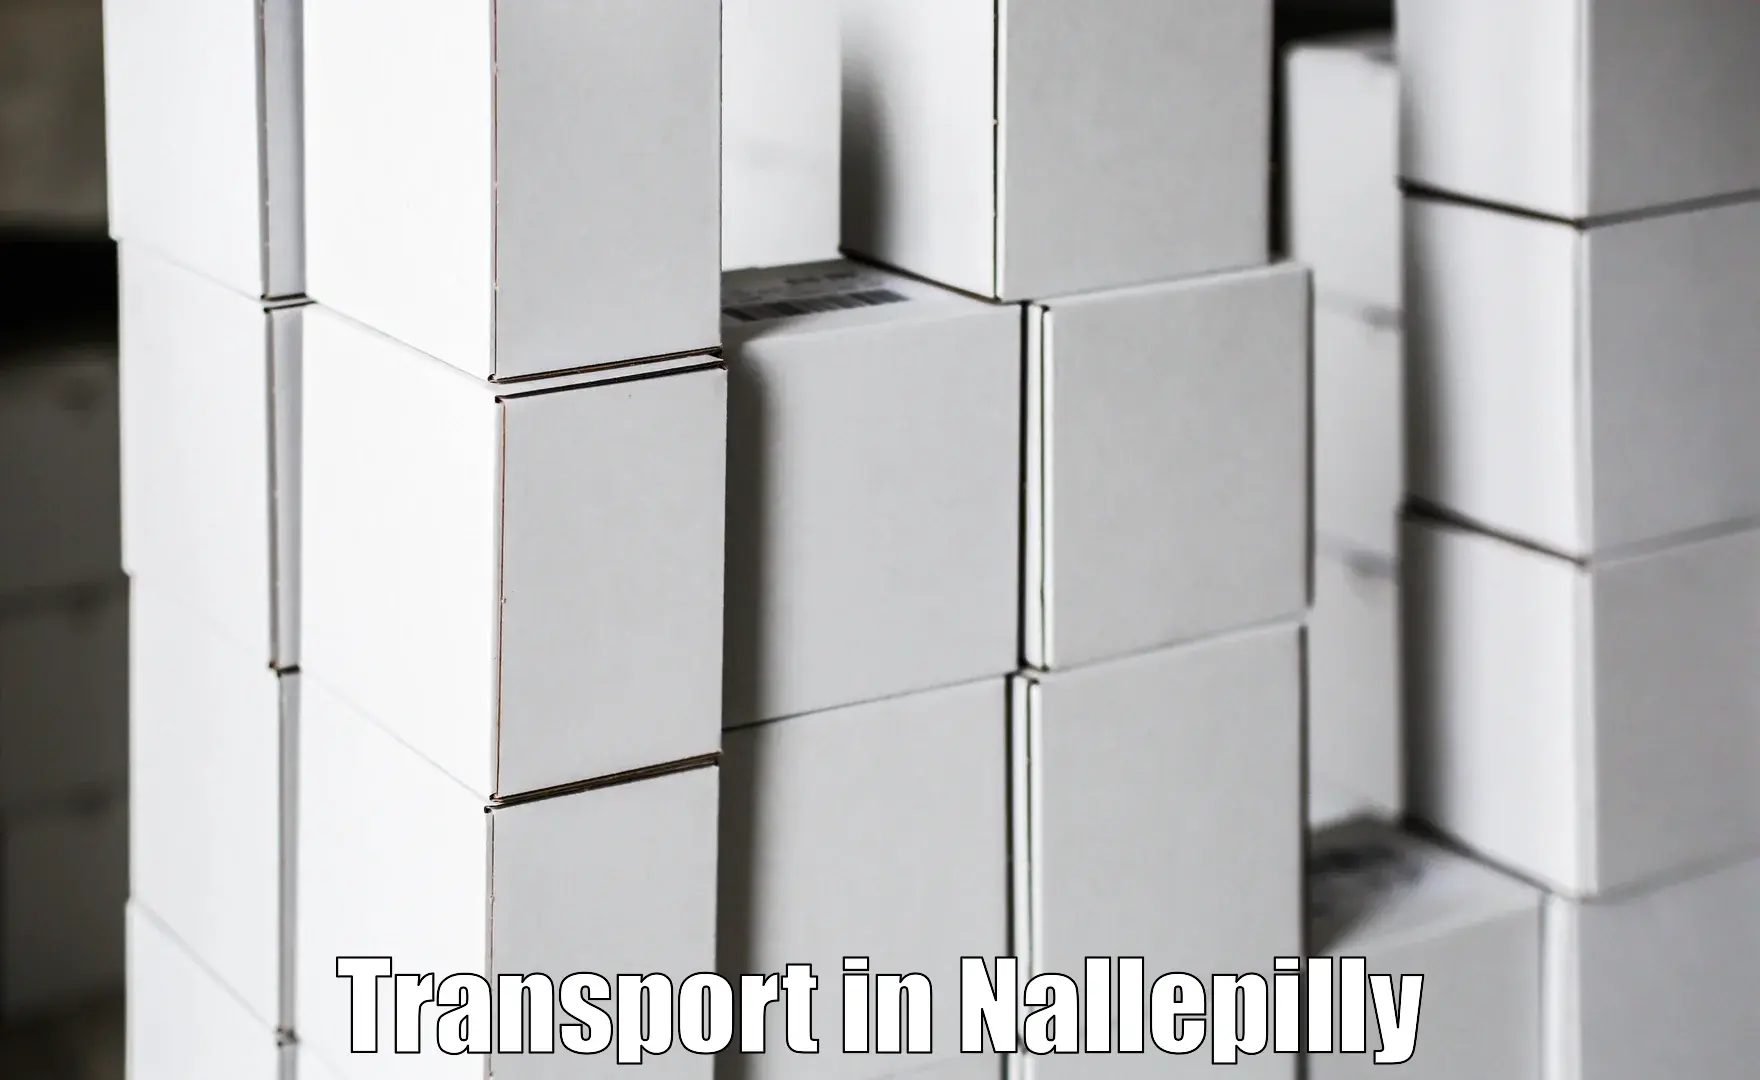 Nearby transport service in Nallepilly